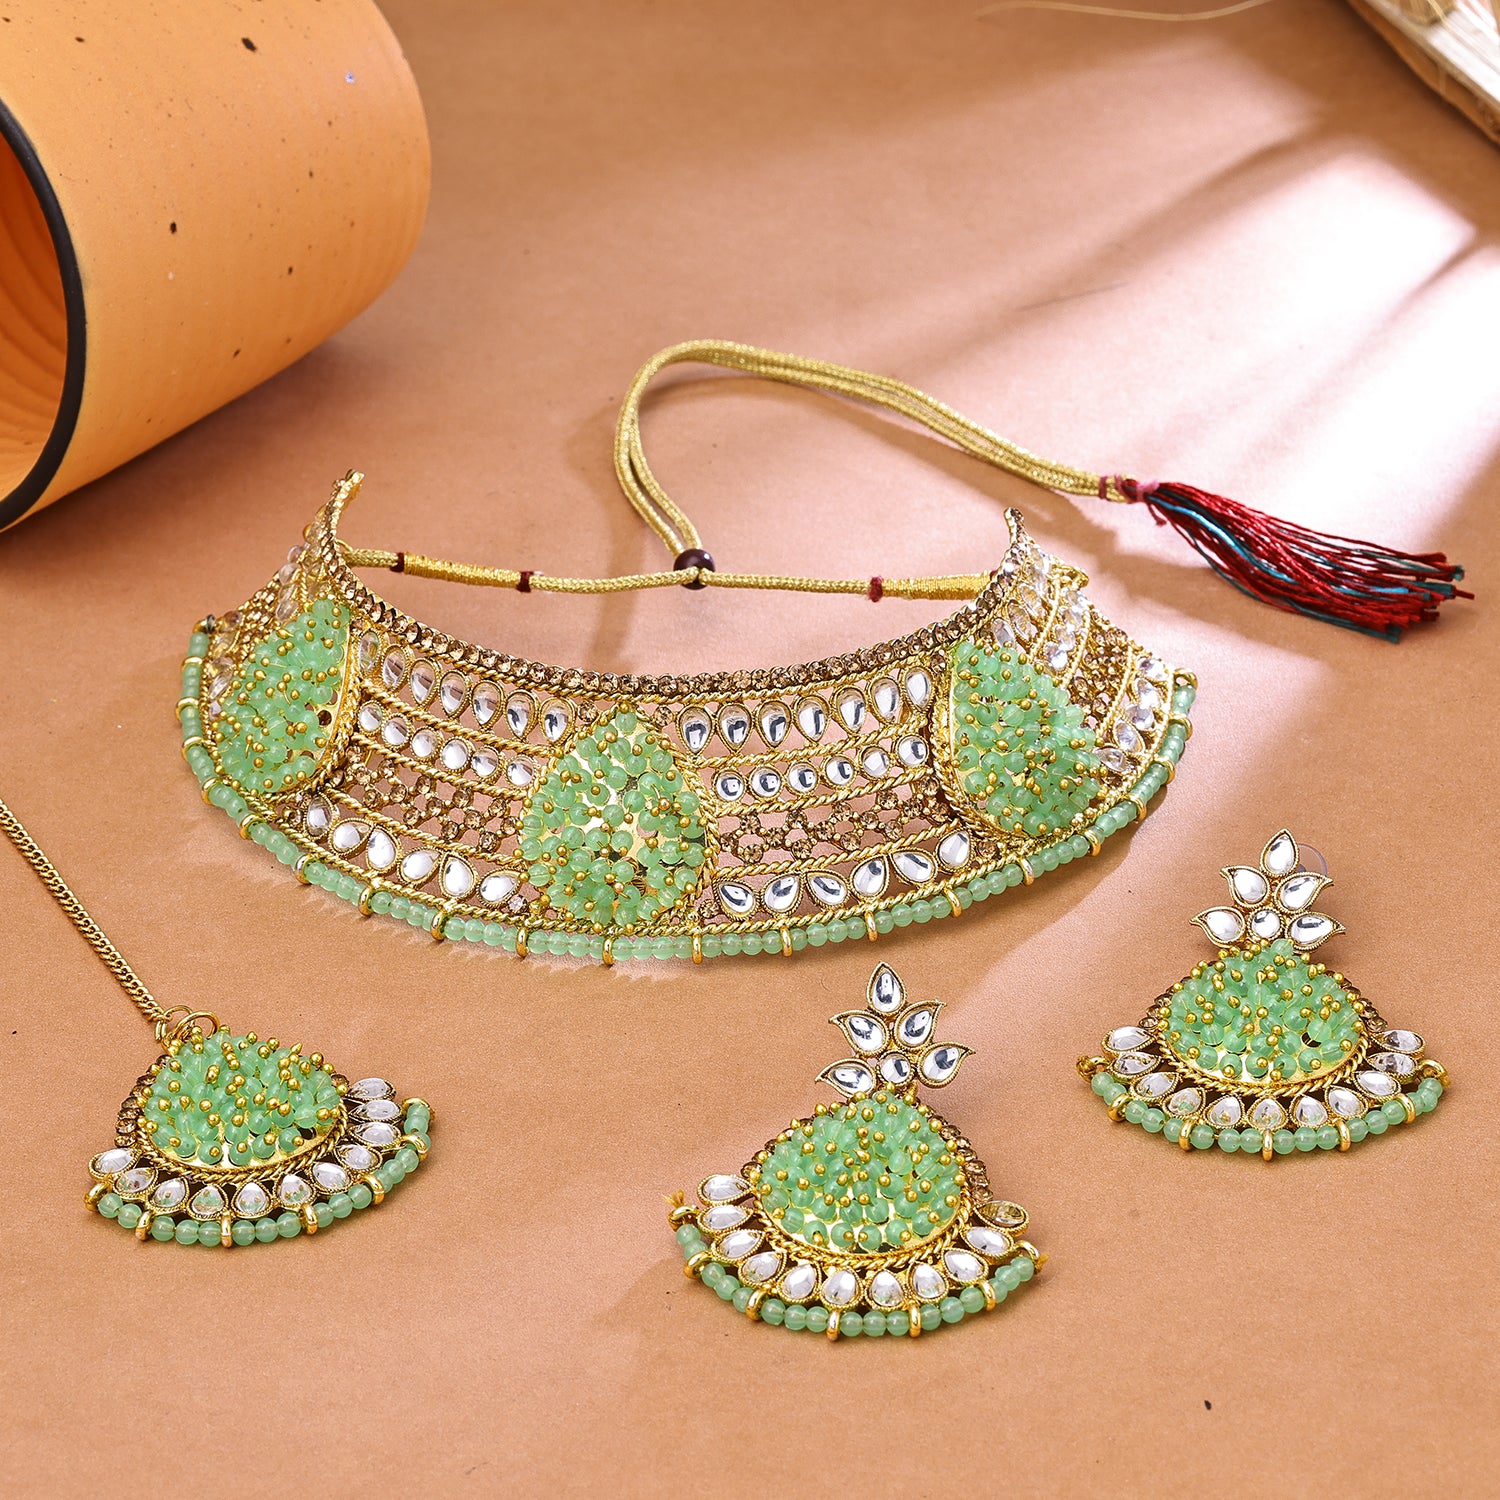 Can you please recommend a few jewelry stores in Gurgaon/Delhi where I can  buy jewelry like this? I am trying to style a pista green lehenga for a  Sangeeth! How much can